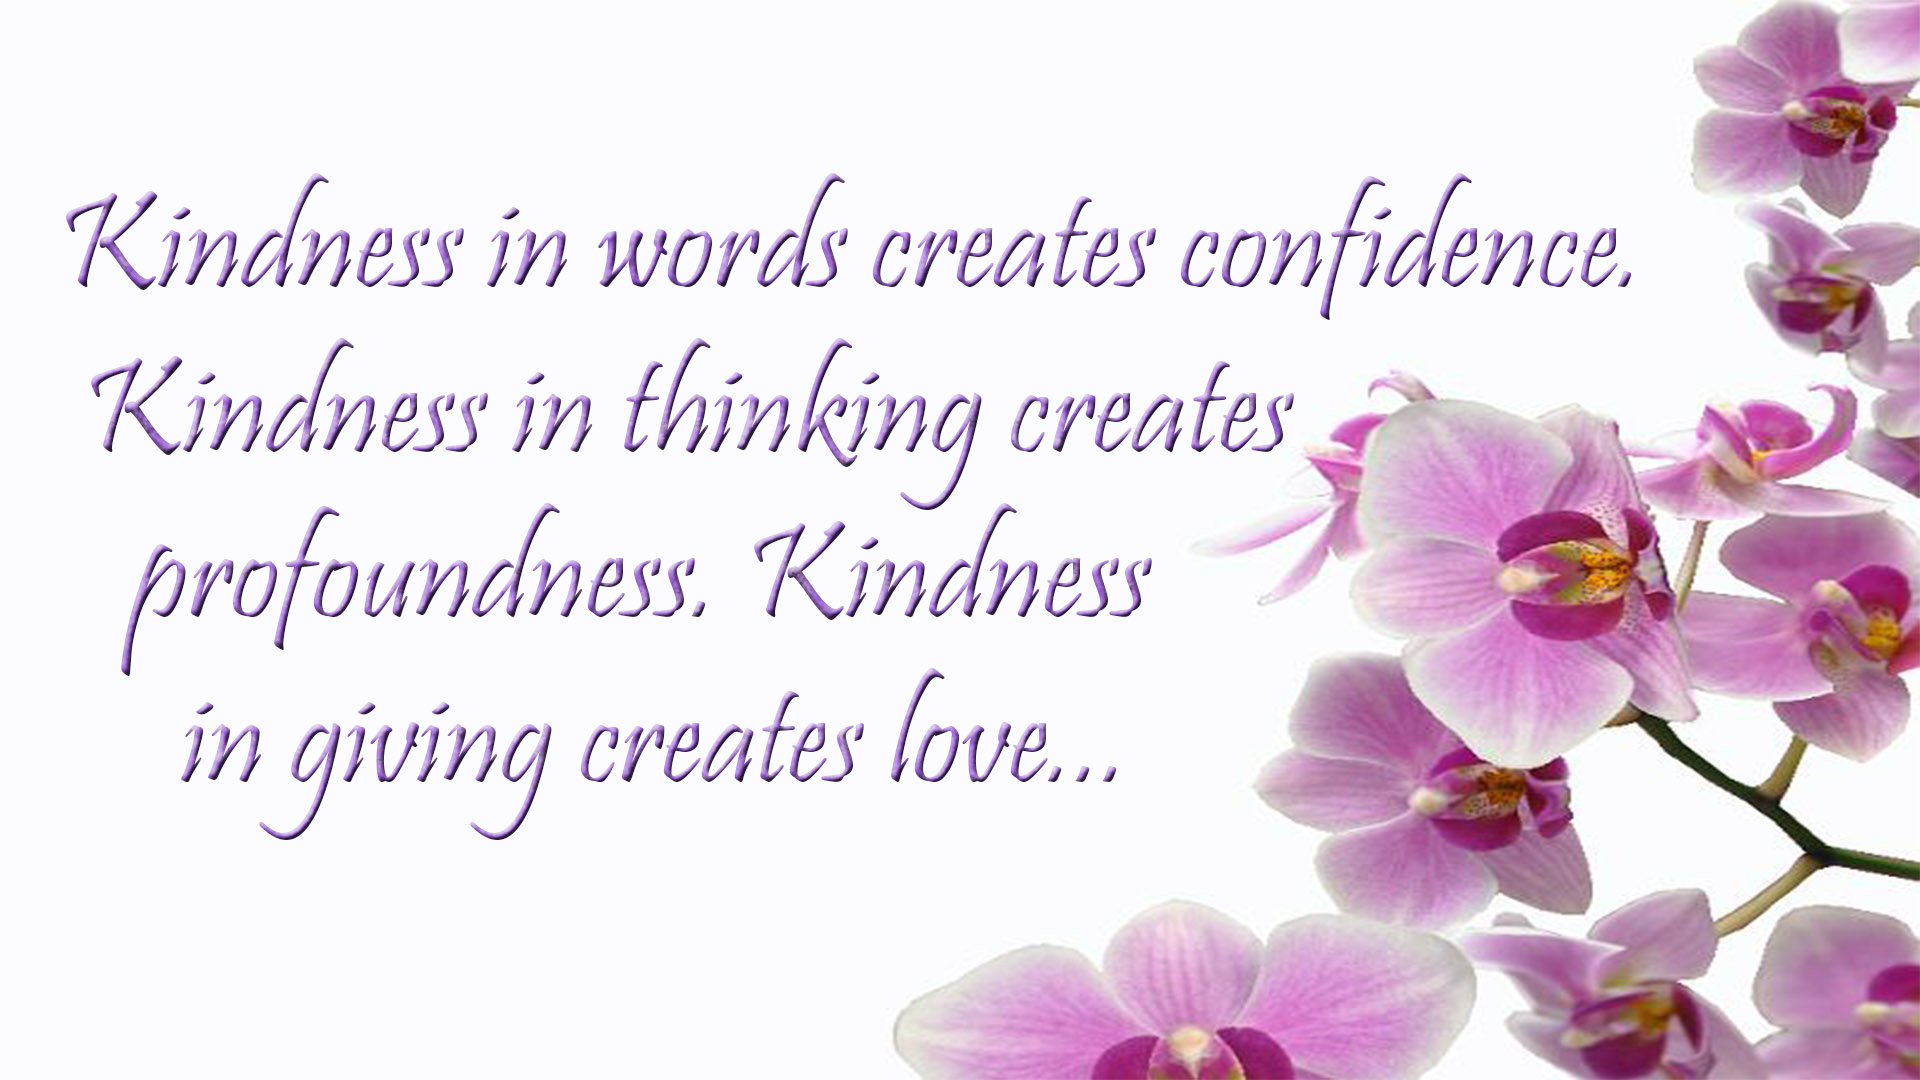 world kindness day quotes image